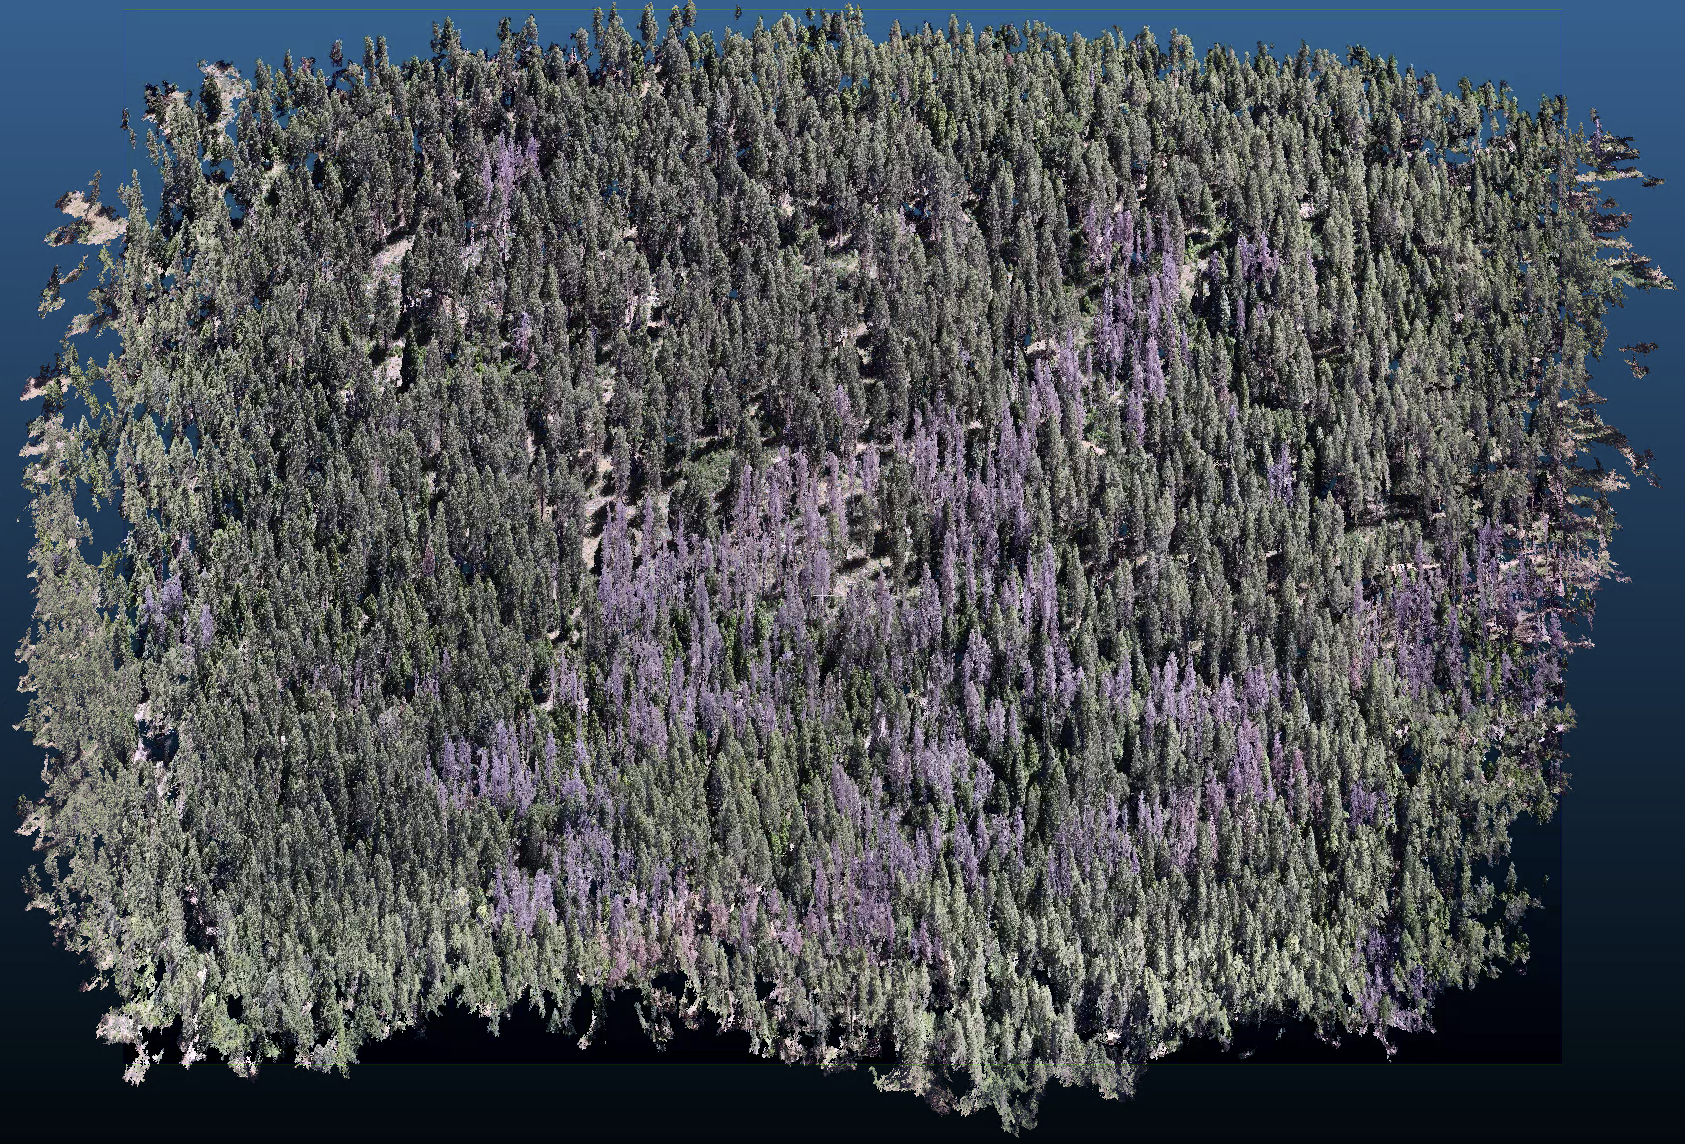 Original point cloud of a forested site, generated using Pix4D